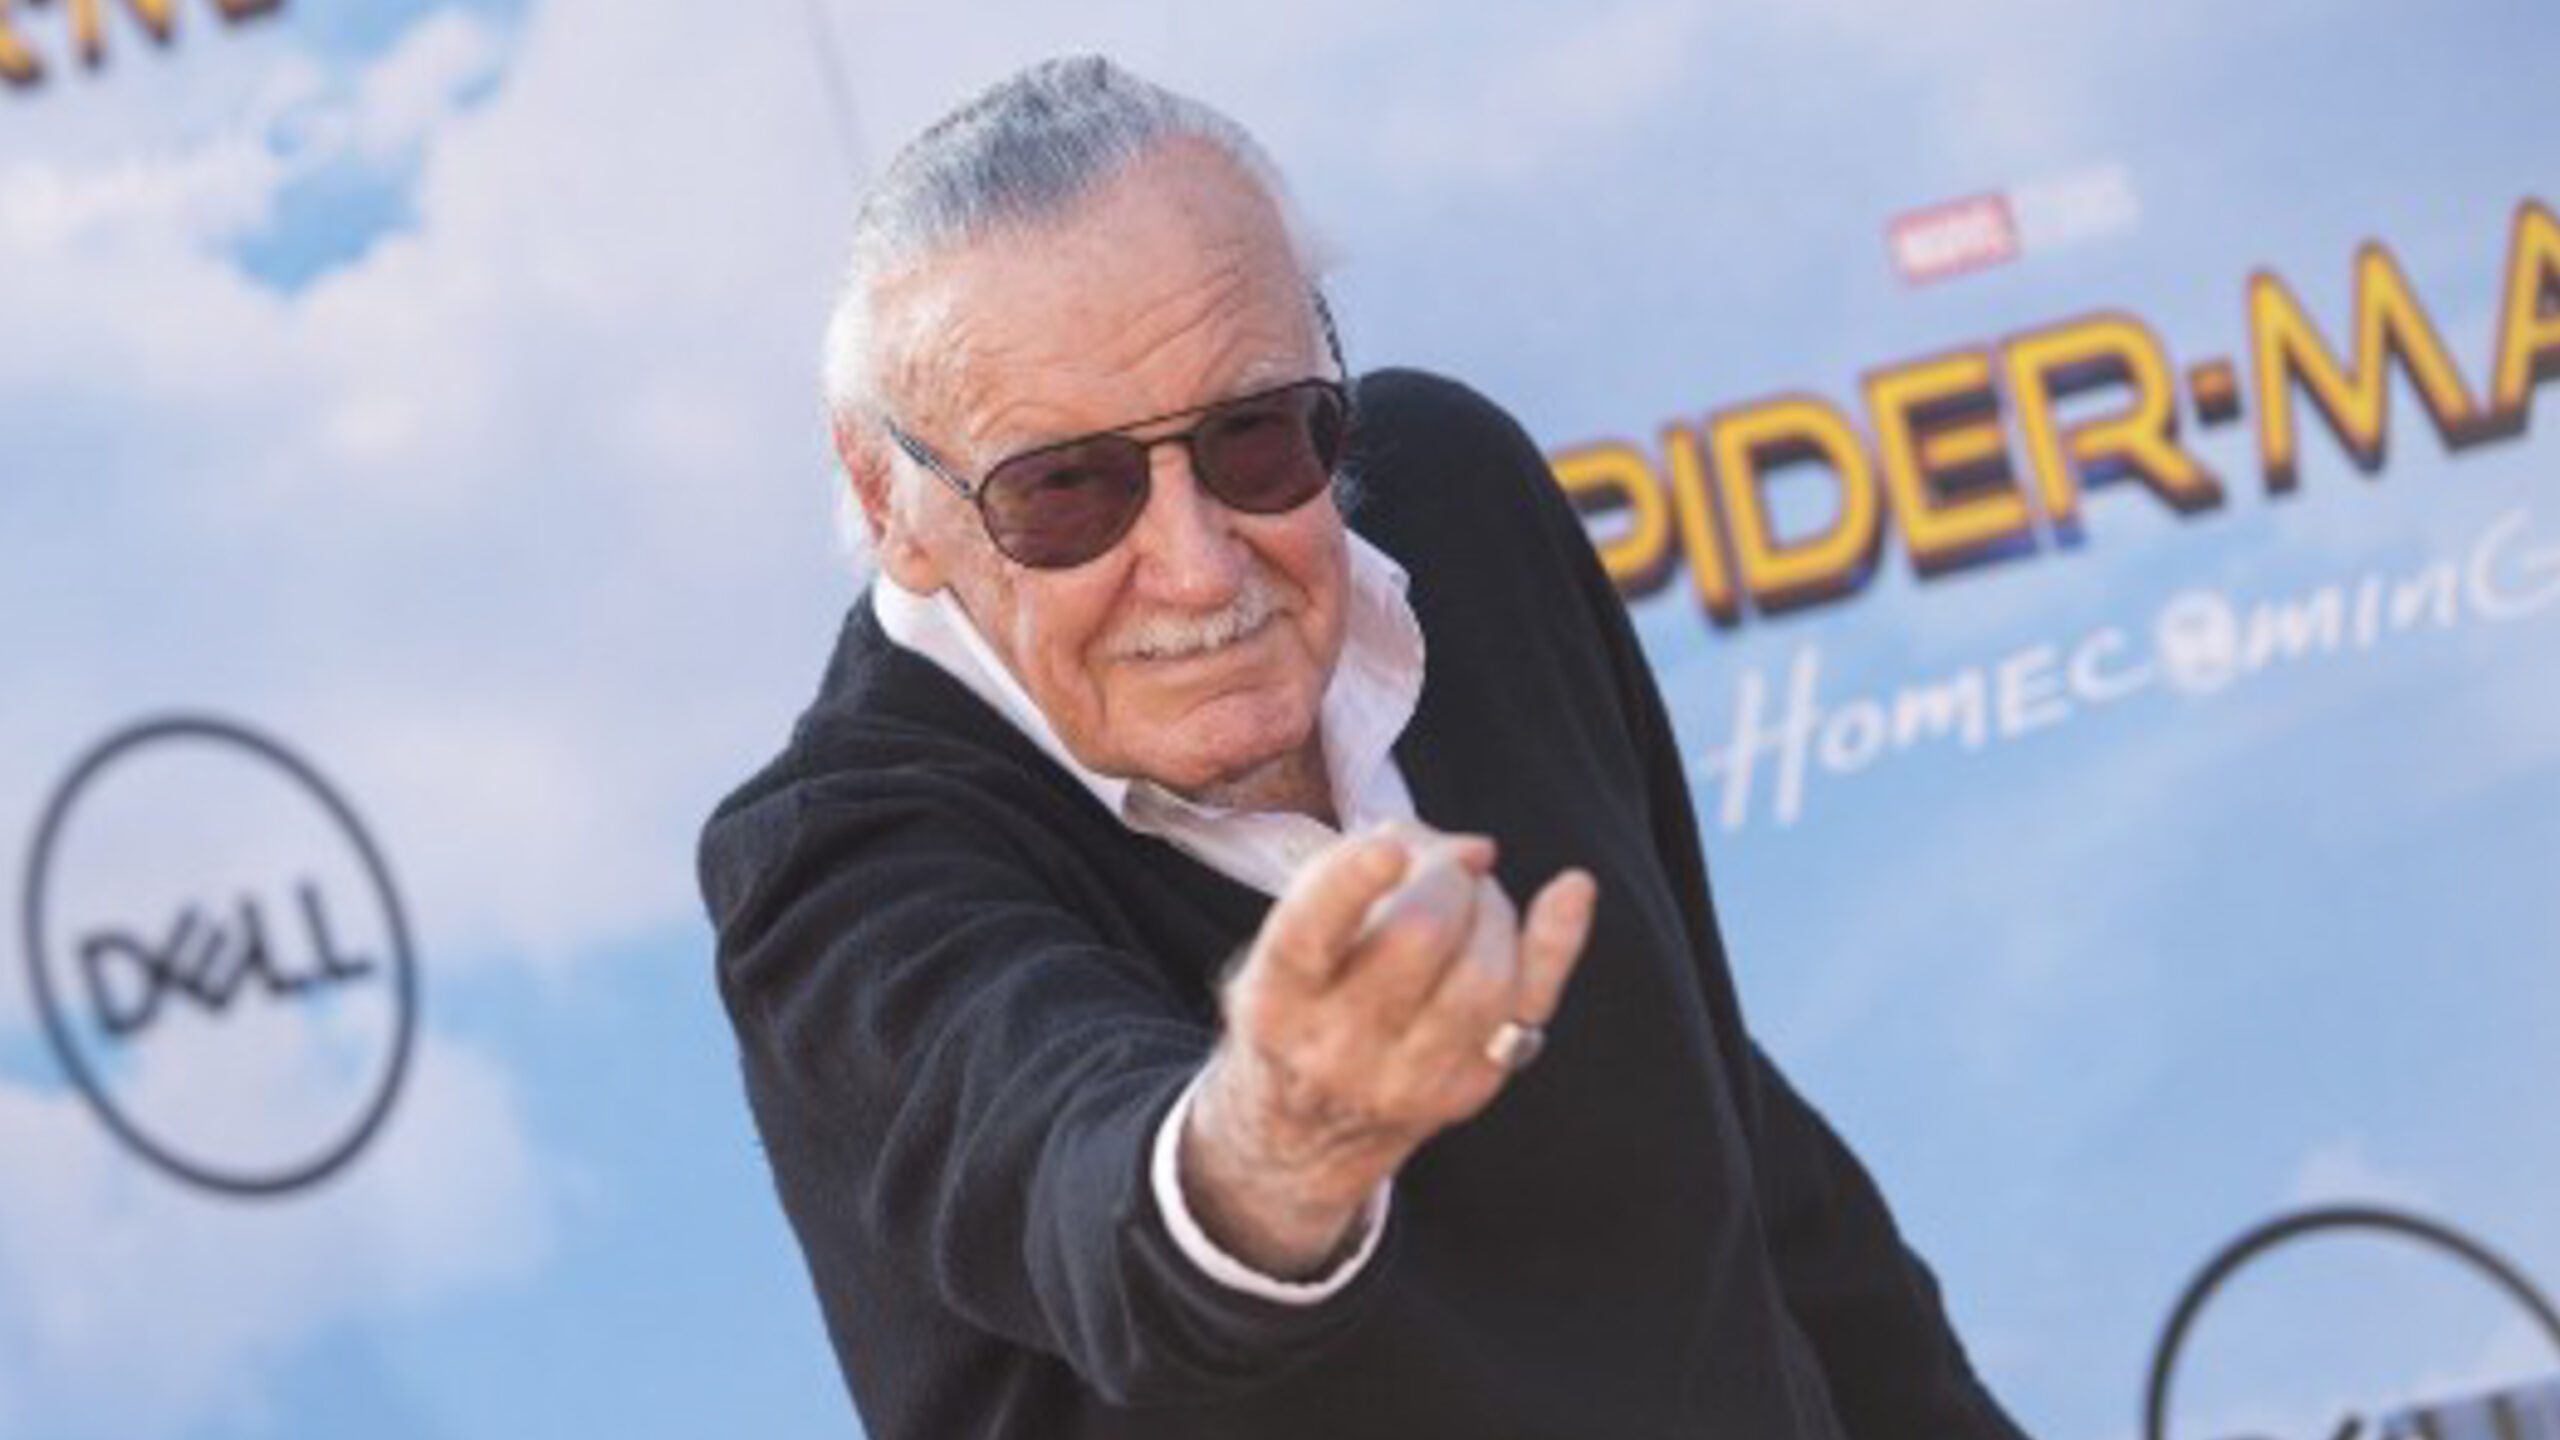 WATCH: Stan Lee pays tribute to Walt Disney at D23 Expo 2017